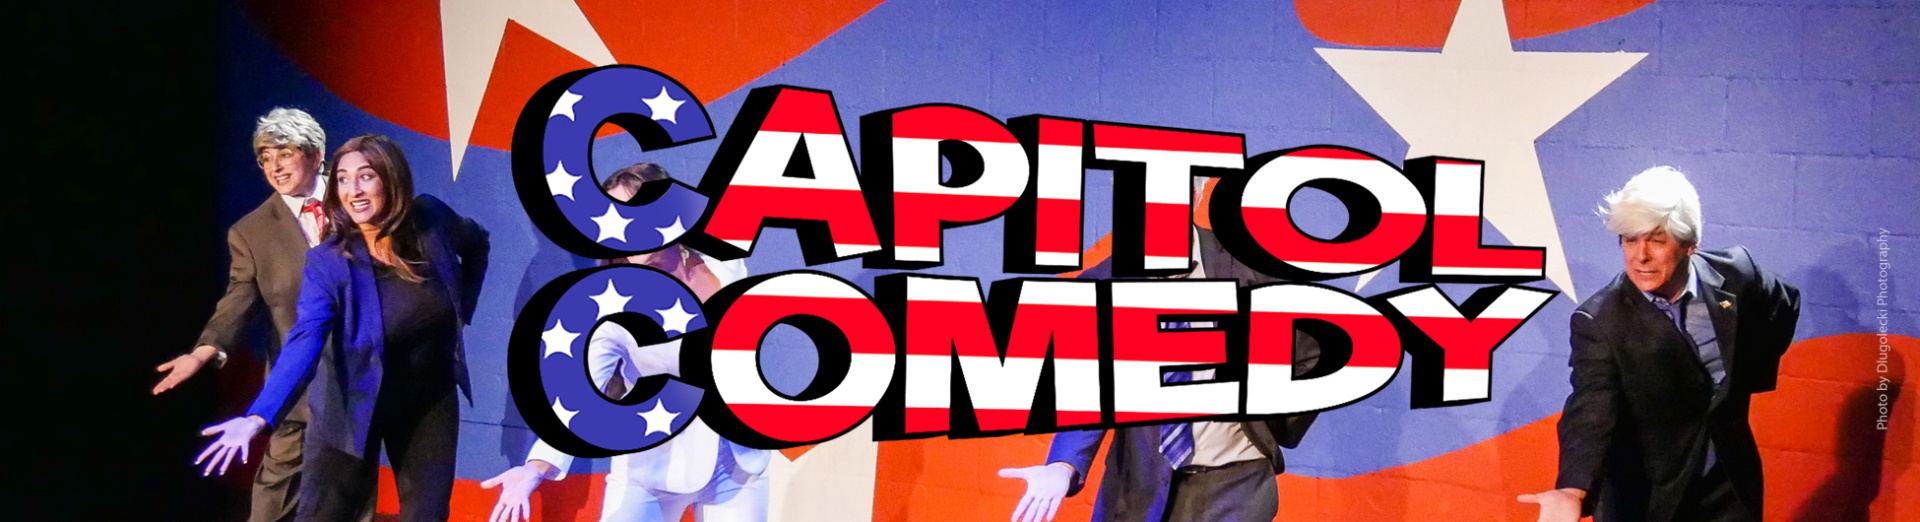 Members of the troupe on stage with the words Capitol Comedy in the center overlaid with the American flag.